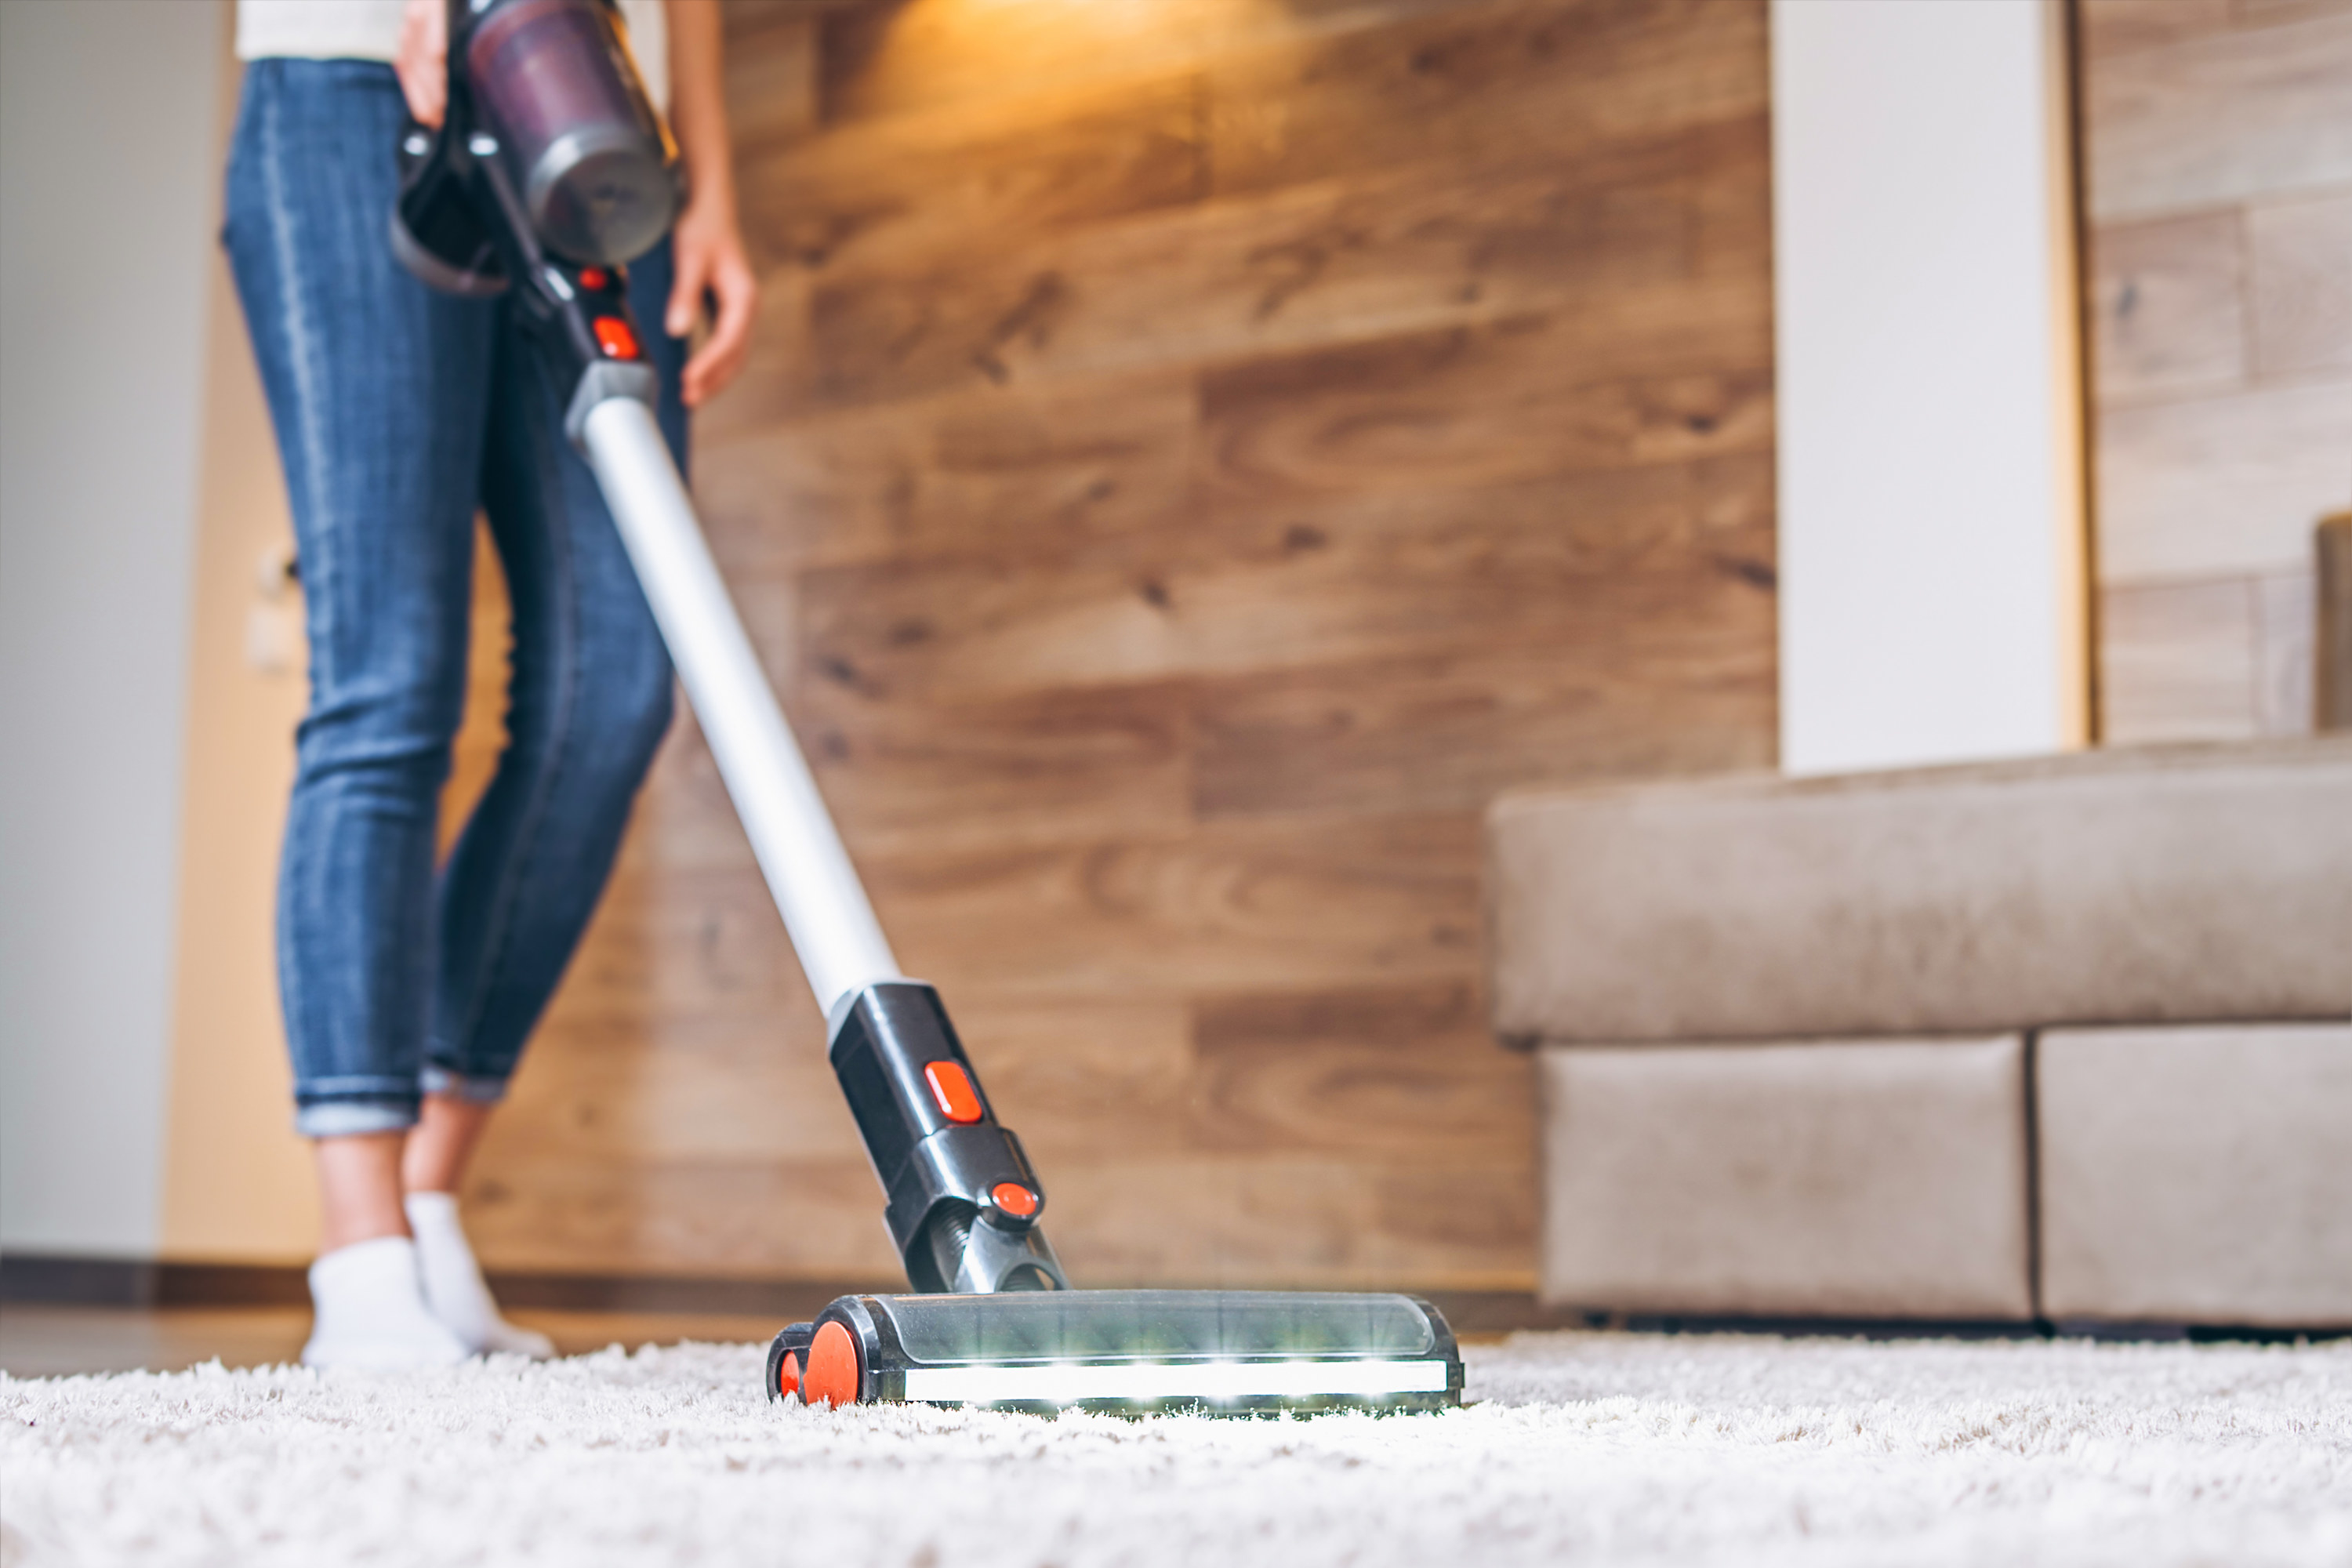 A woman vacuums her carpet.